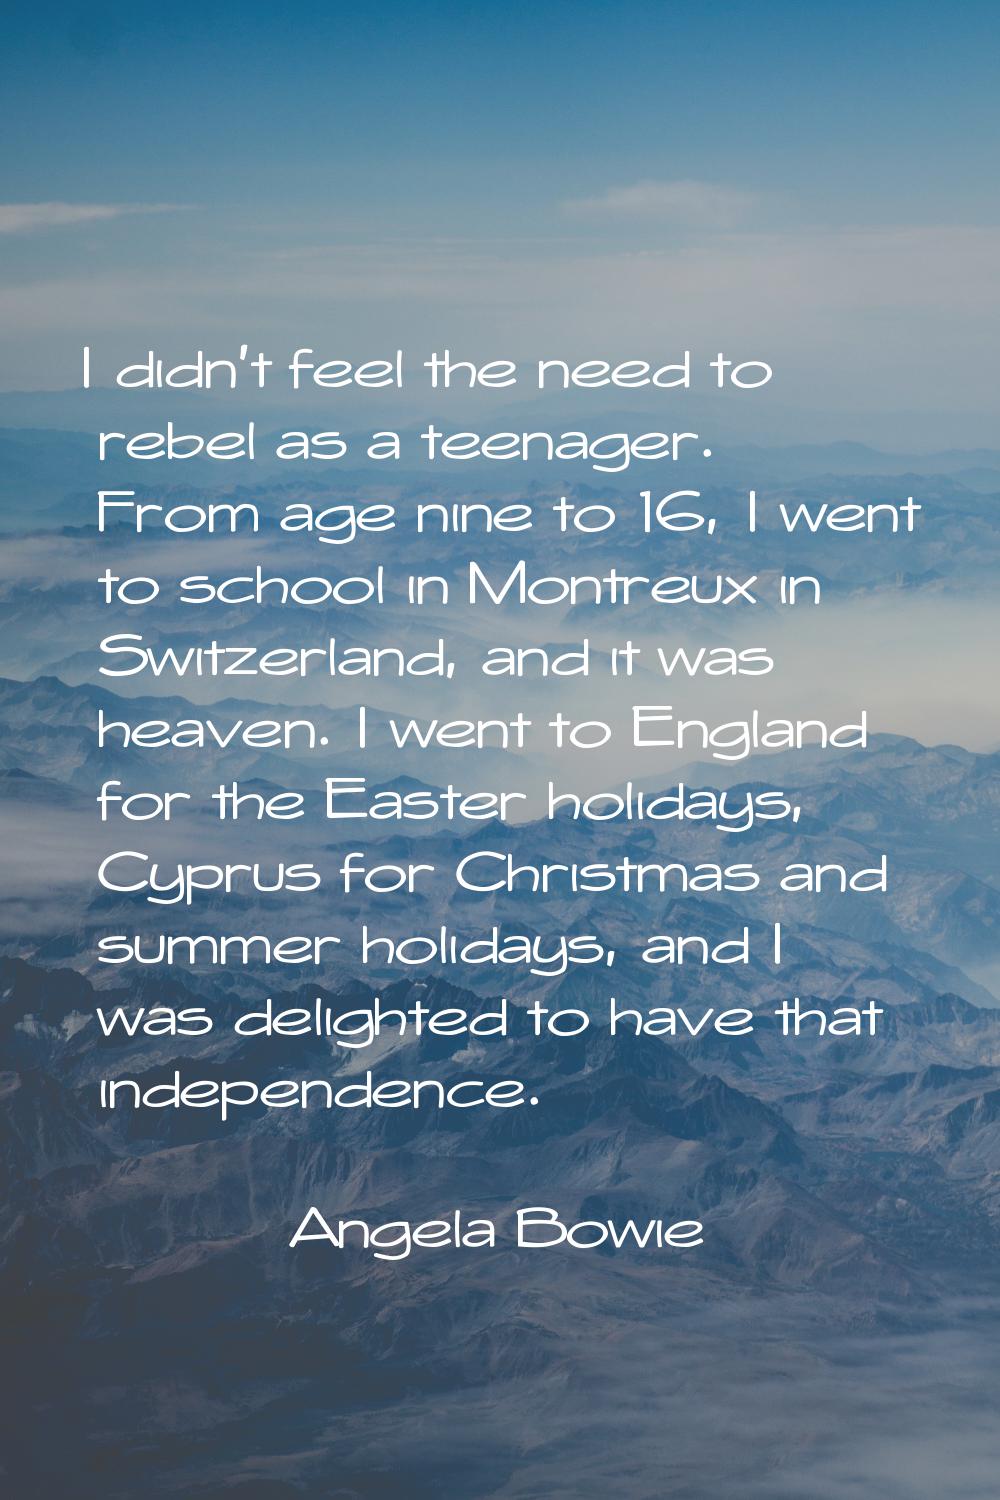 I didn't feel the need to rebel as a teenager. From age nine to 16, I went to school in Montreux in